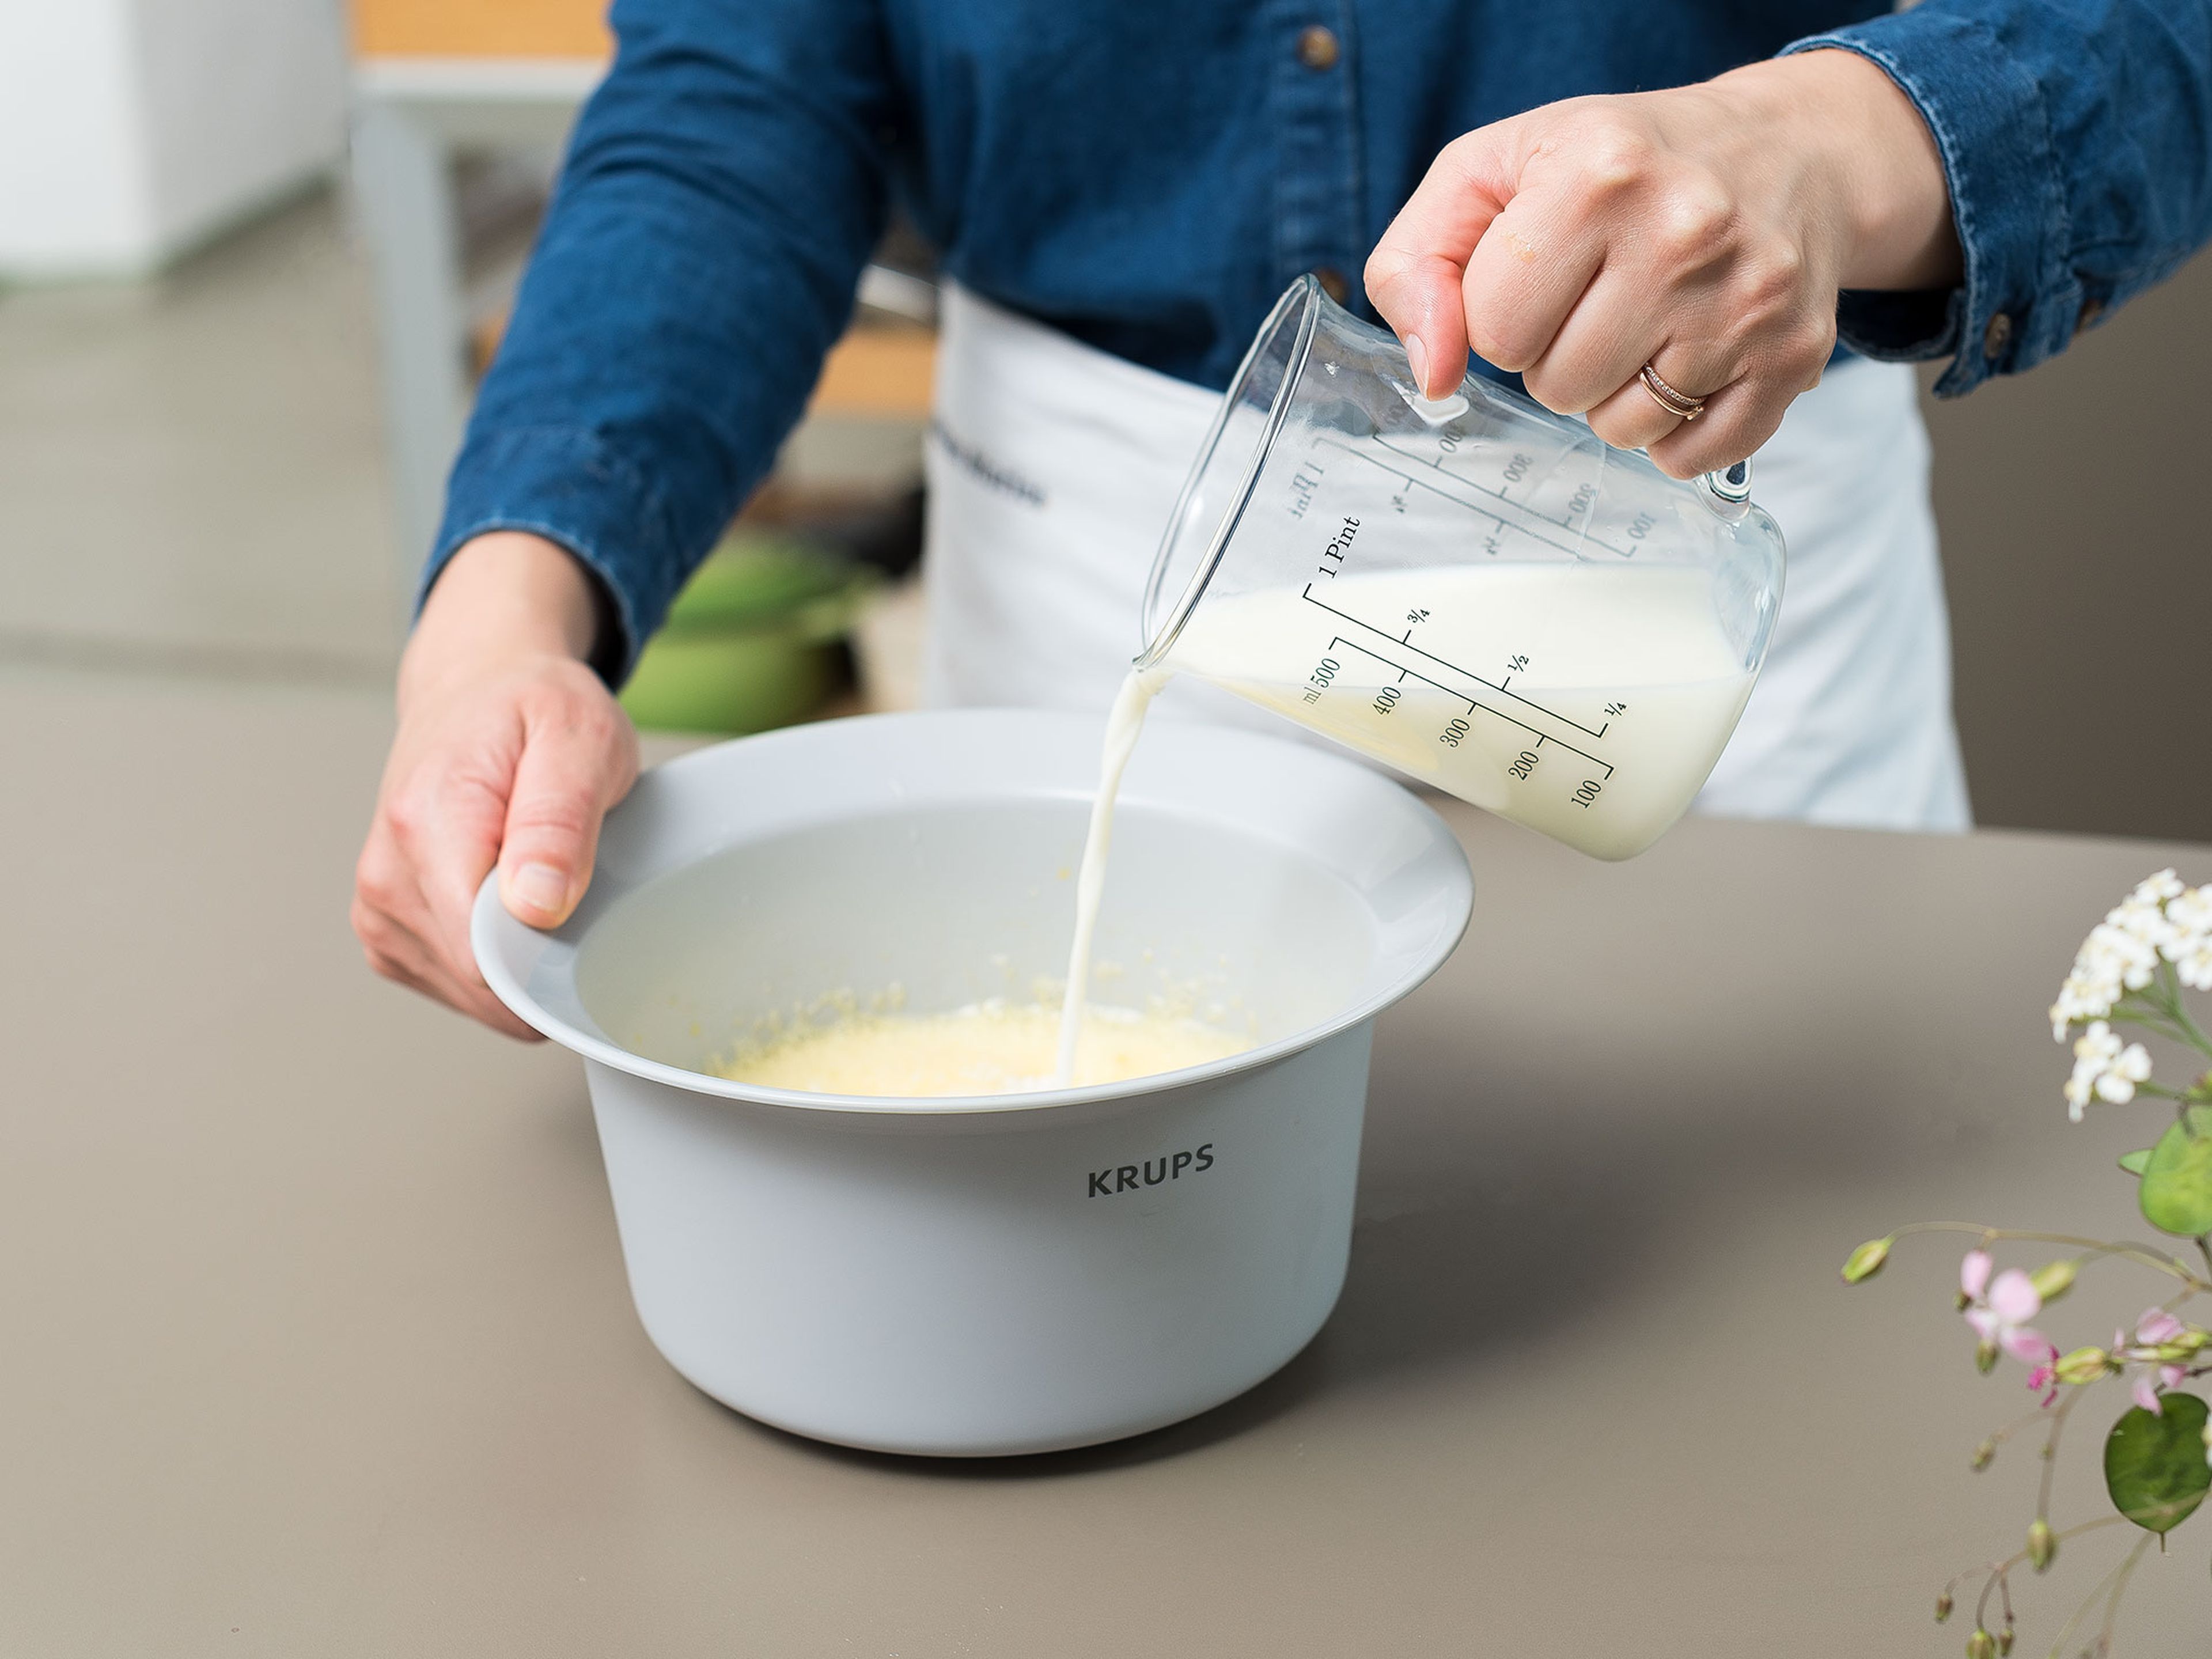 In a large mixing bowl, beat the eggs, then mix in sugar and salt and whisk until fluffy. Add milk, flour, and melted butter and mix until combined.